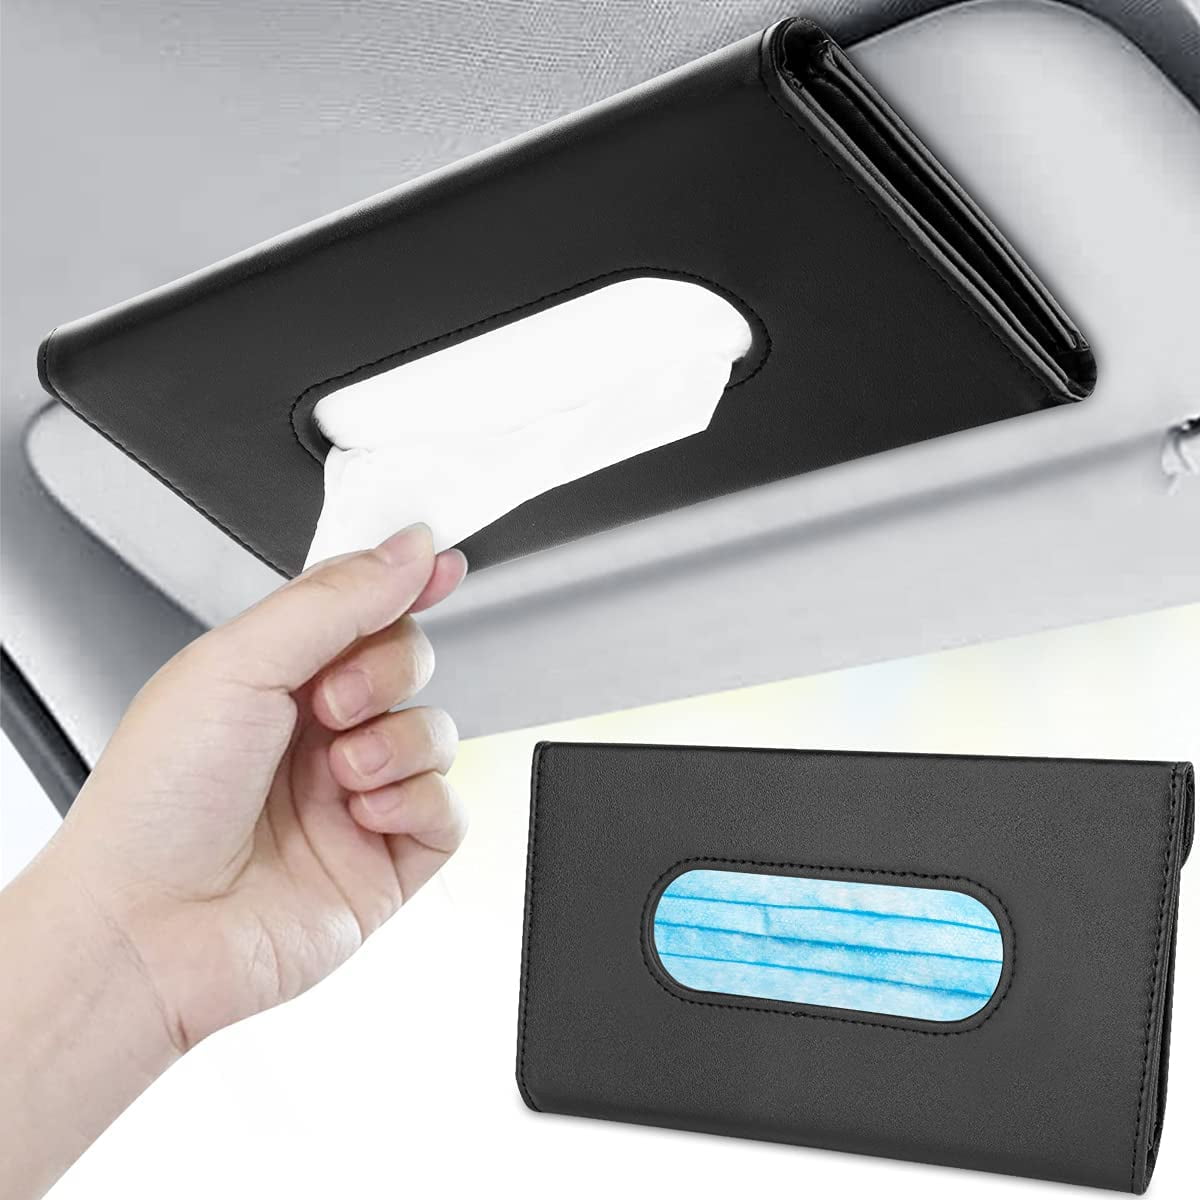 Paper Storage Cases for Universal Auto Vehicle Sun Visor Napkin Holder White Hanging Car Tissue Holder with PU Leather Decoration for Cars and Trucks Seat Back Tissue Box 2Pack Car Tissue Holder 